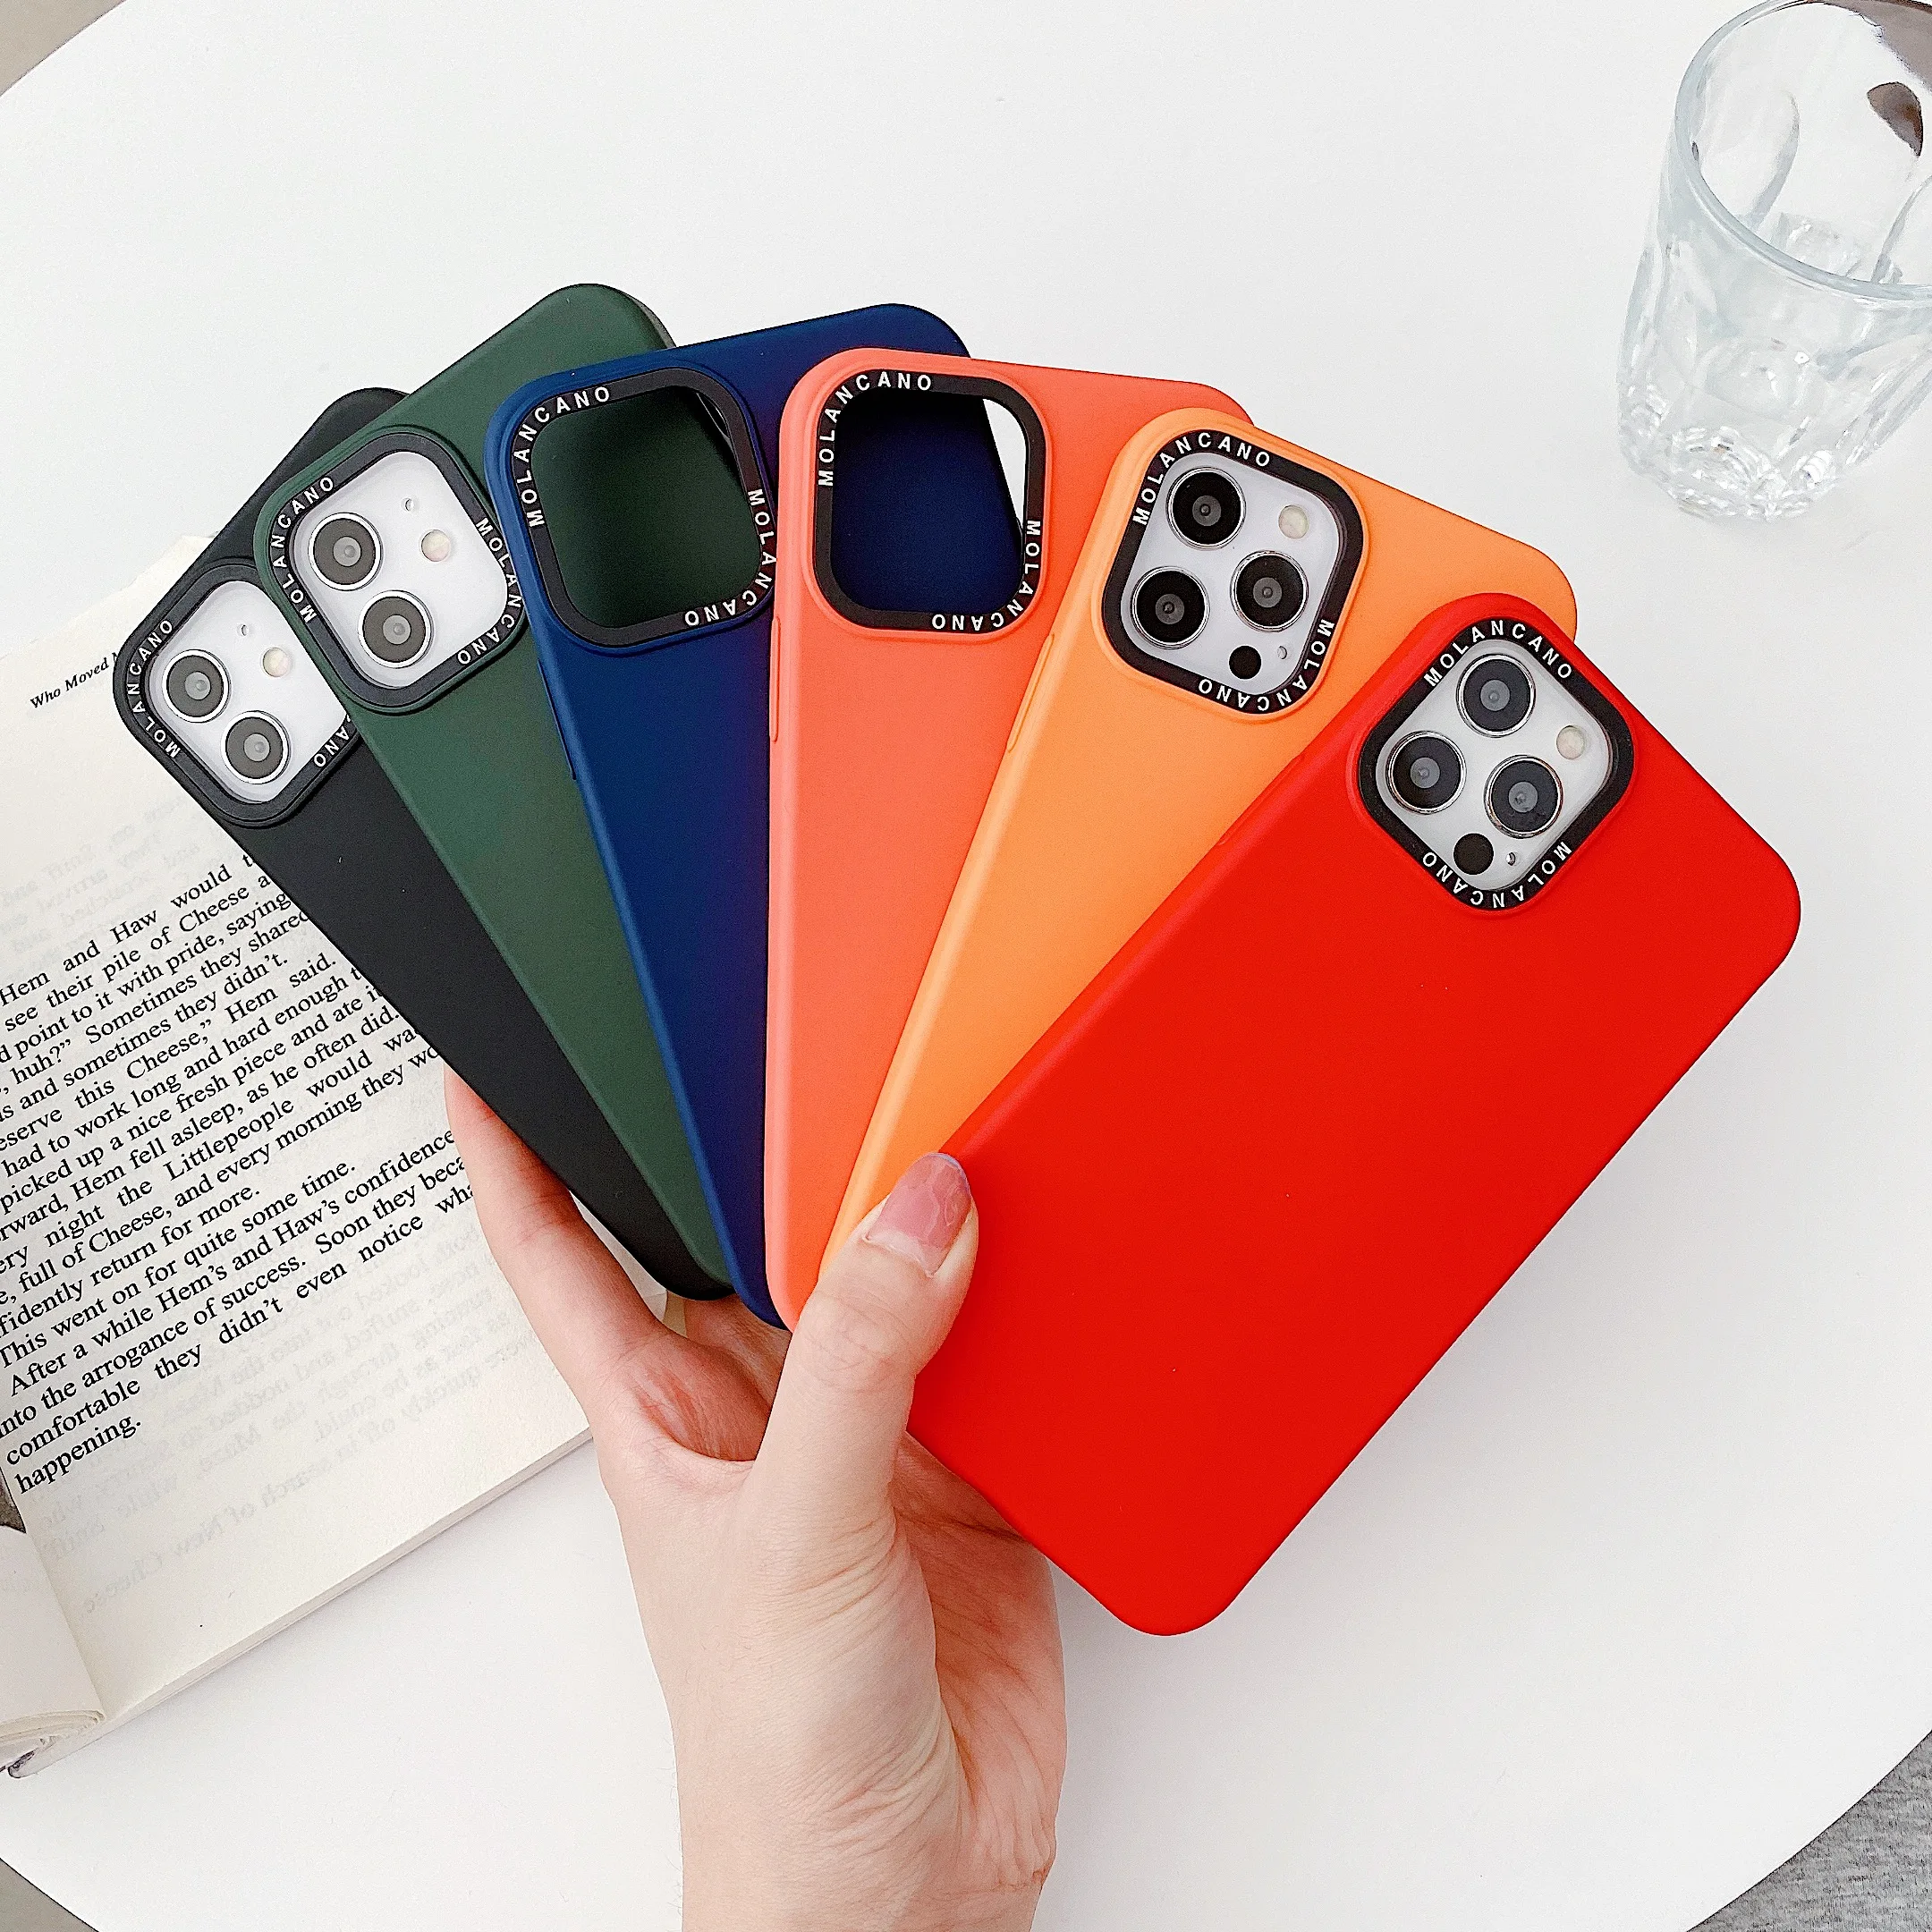 

New Arrival Molan Cano Hana Soft TPU Full Cover Case For iphone 12 Pro Max Mobile Phone Bags & Cases, 6 colors